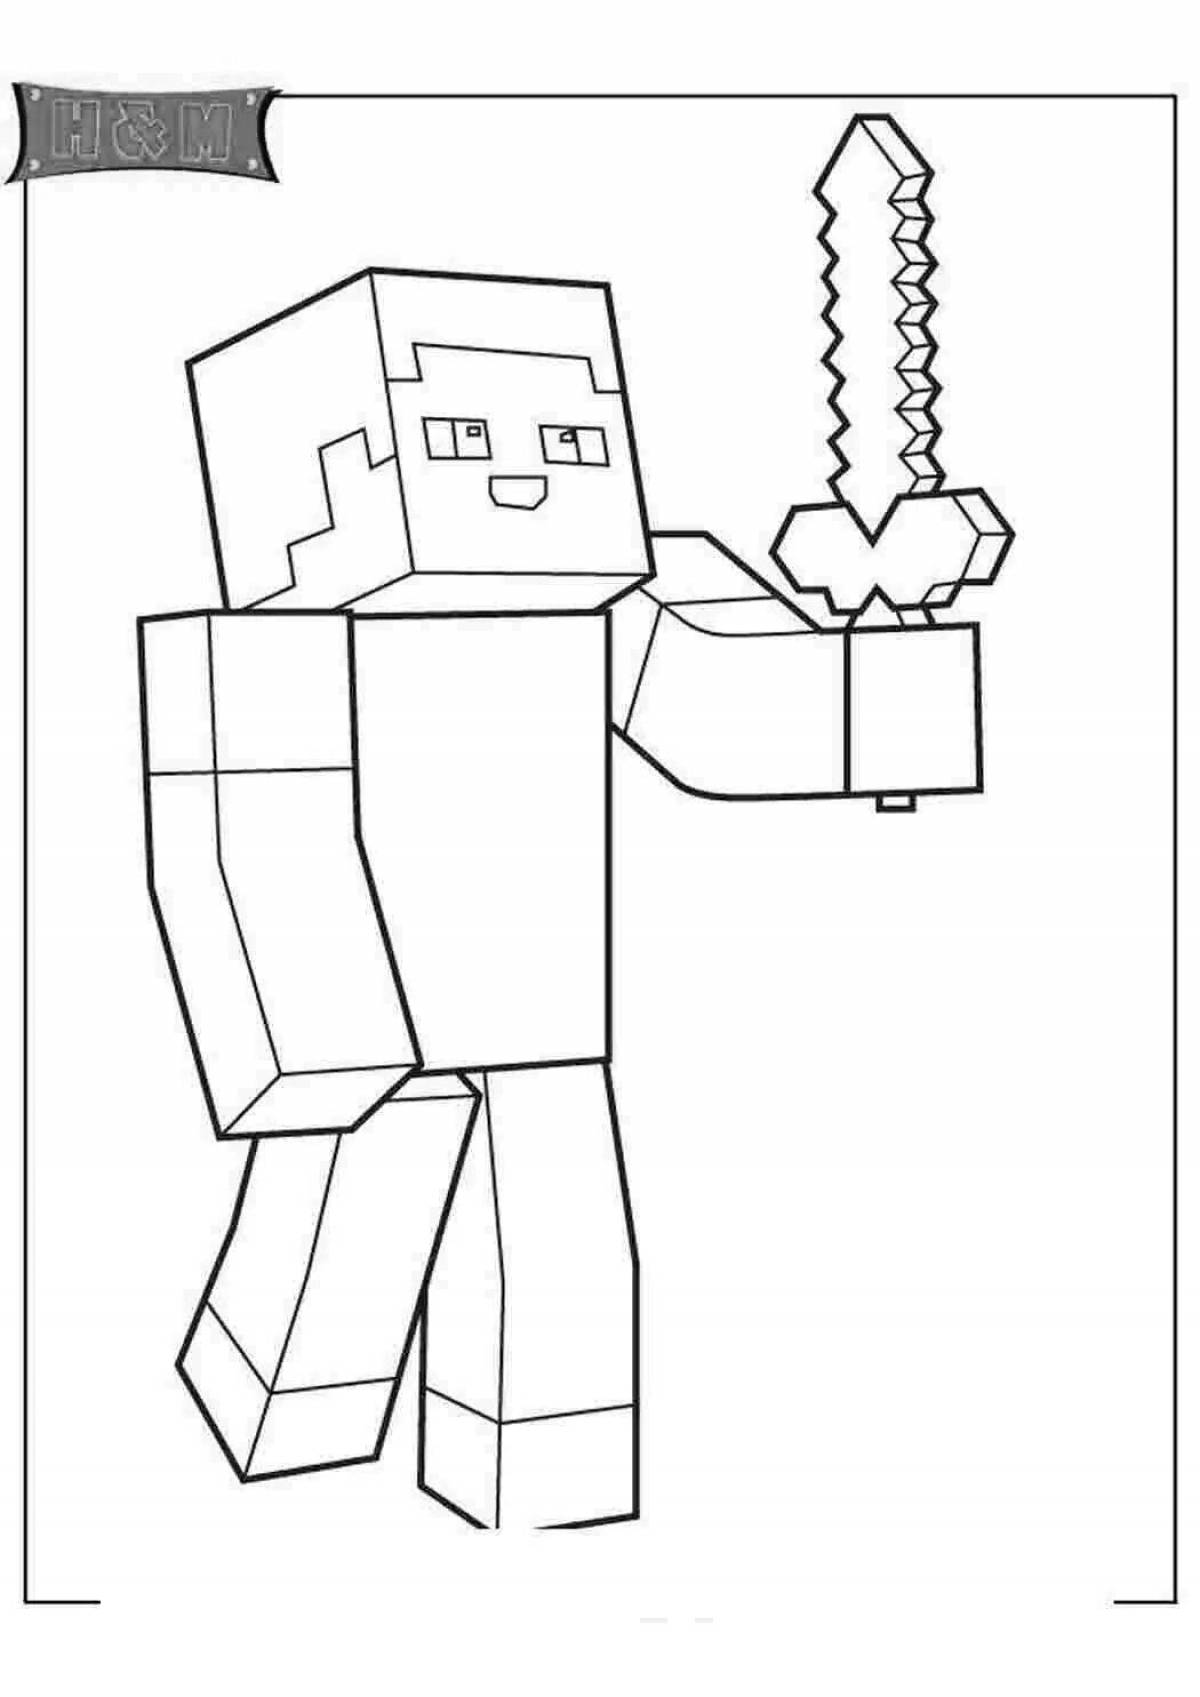 Creative minecraft coloring book for kids 5-6 years old